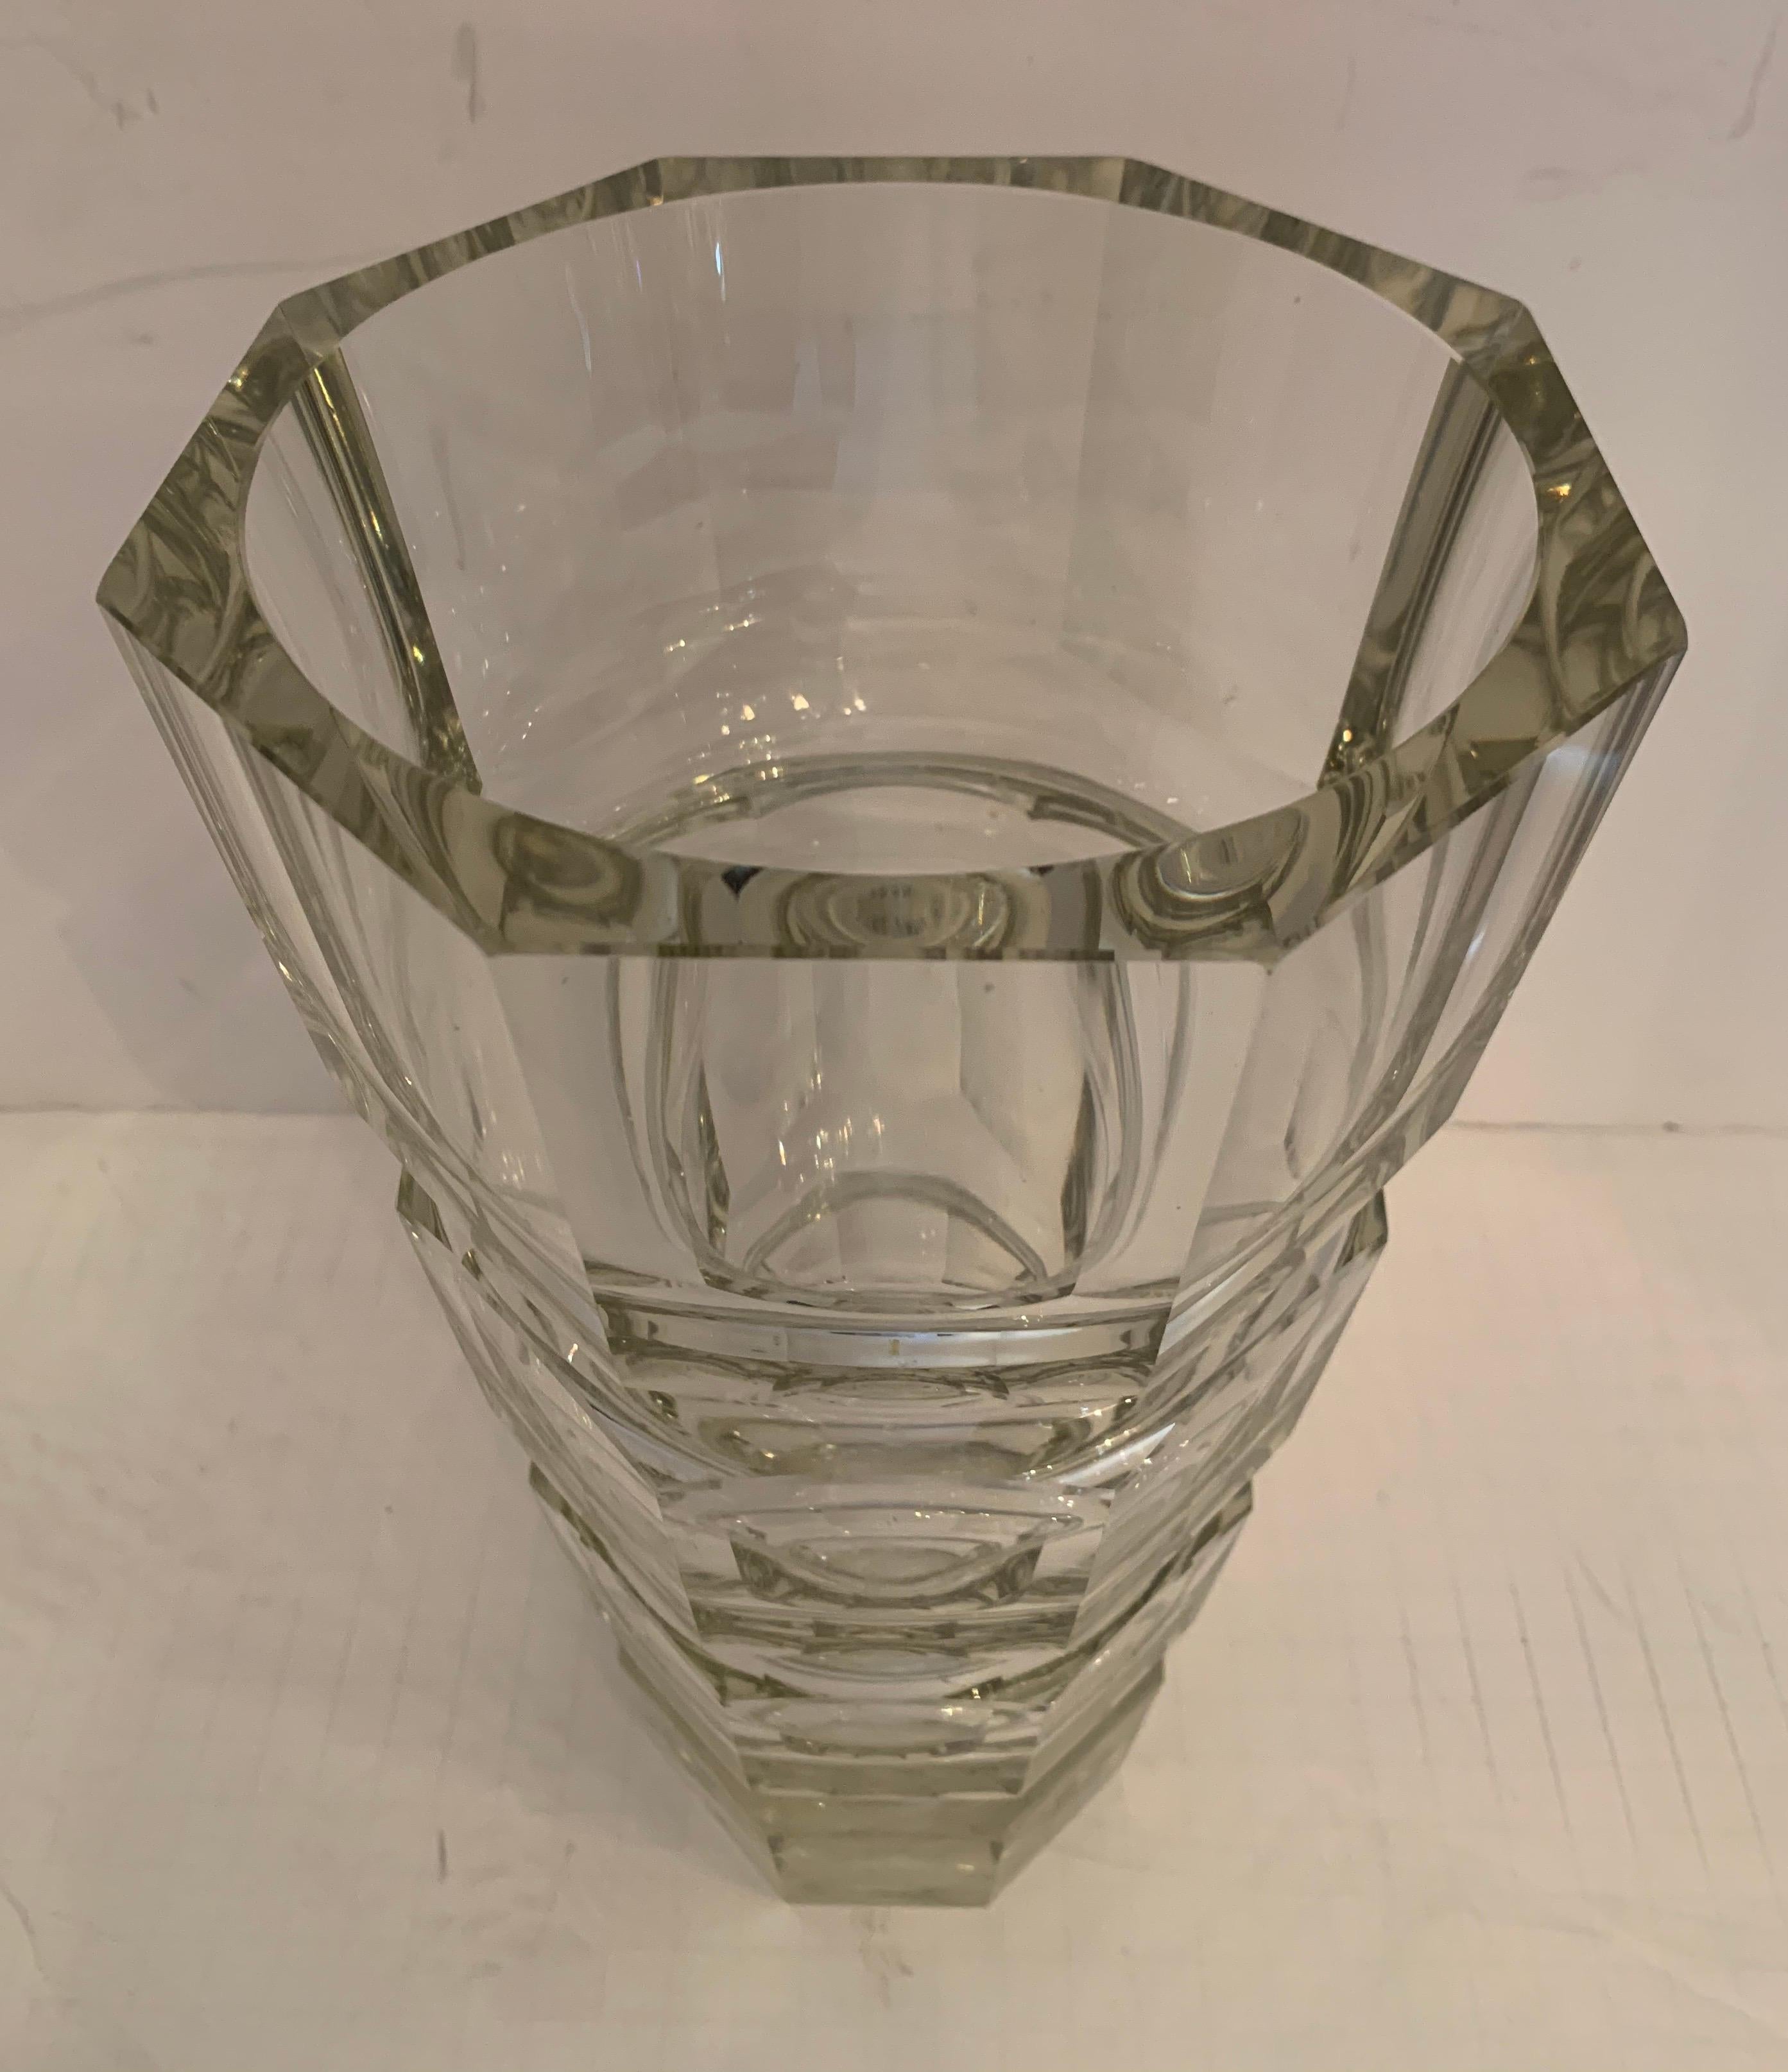 A wonderful French Baccarat style large heavy crystal panel vase in the style of Edith / Harcourt.